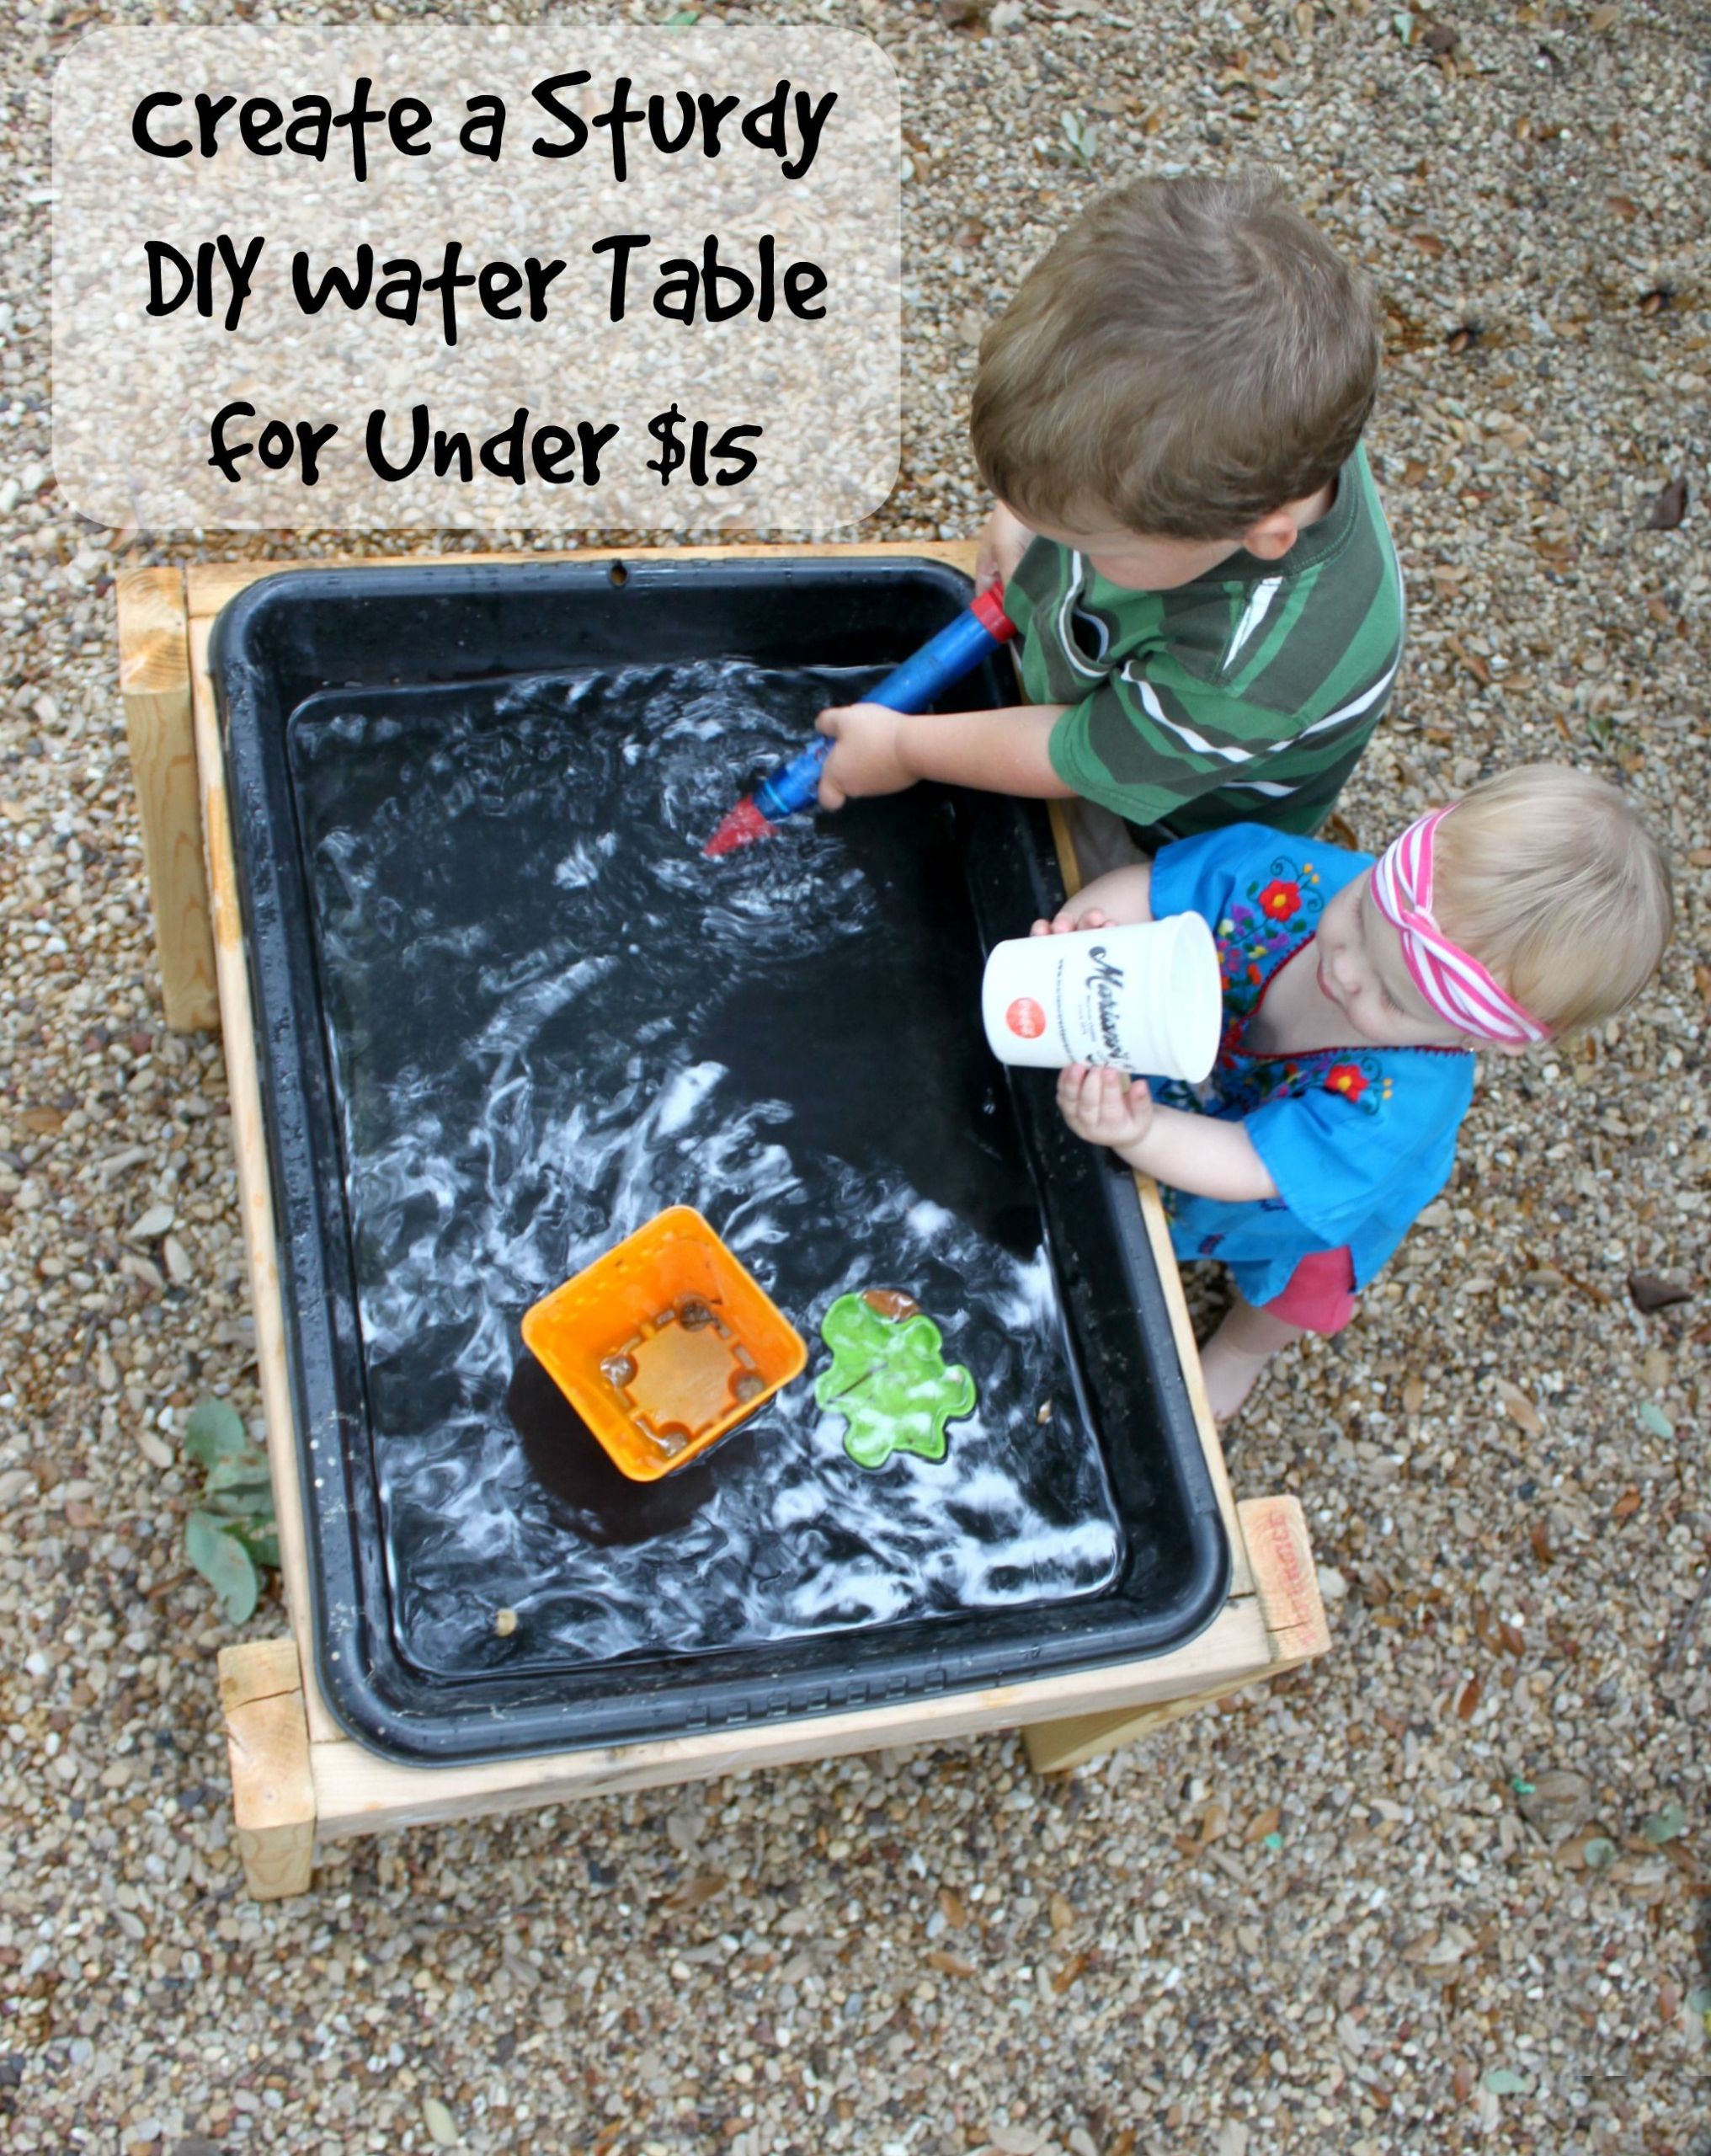 DIY Water Table For Toddlers
 Make a DIY Water Table for Less than $15